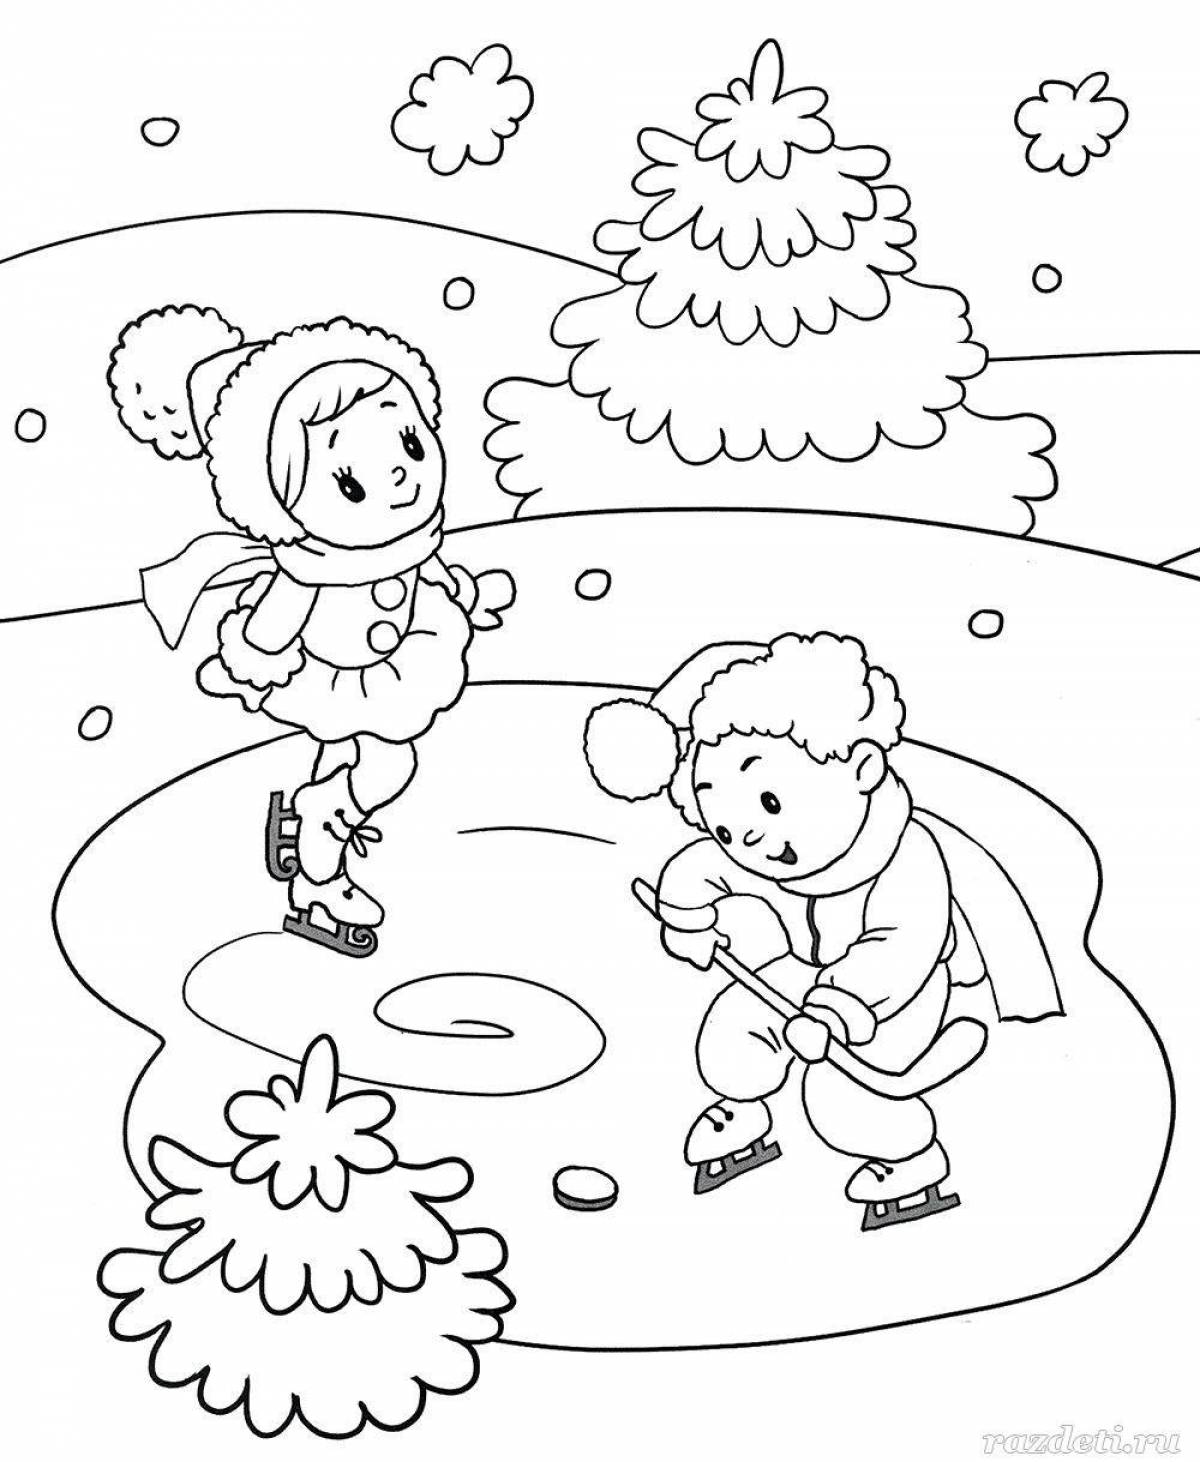 Adorable winter coloring book for 4-5 year olds